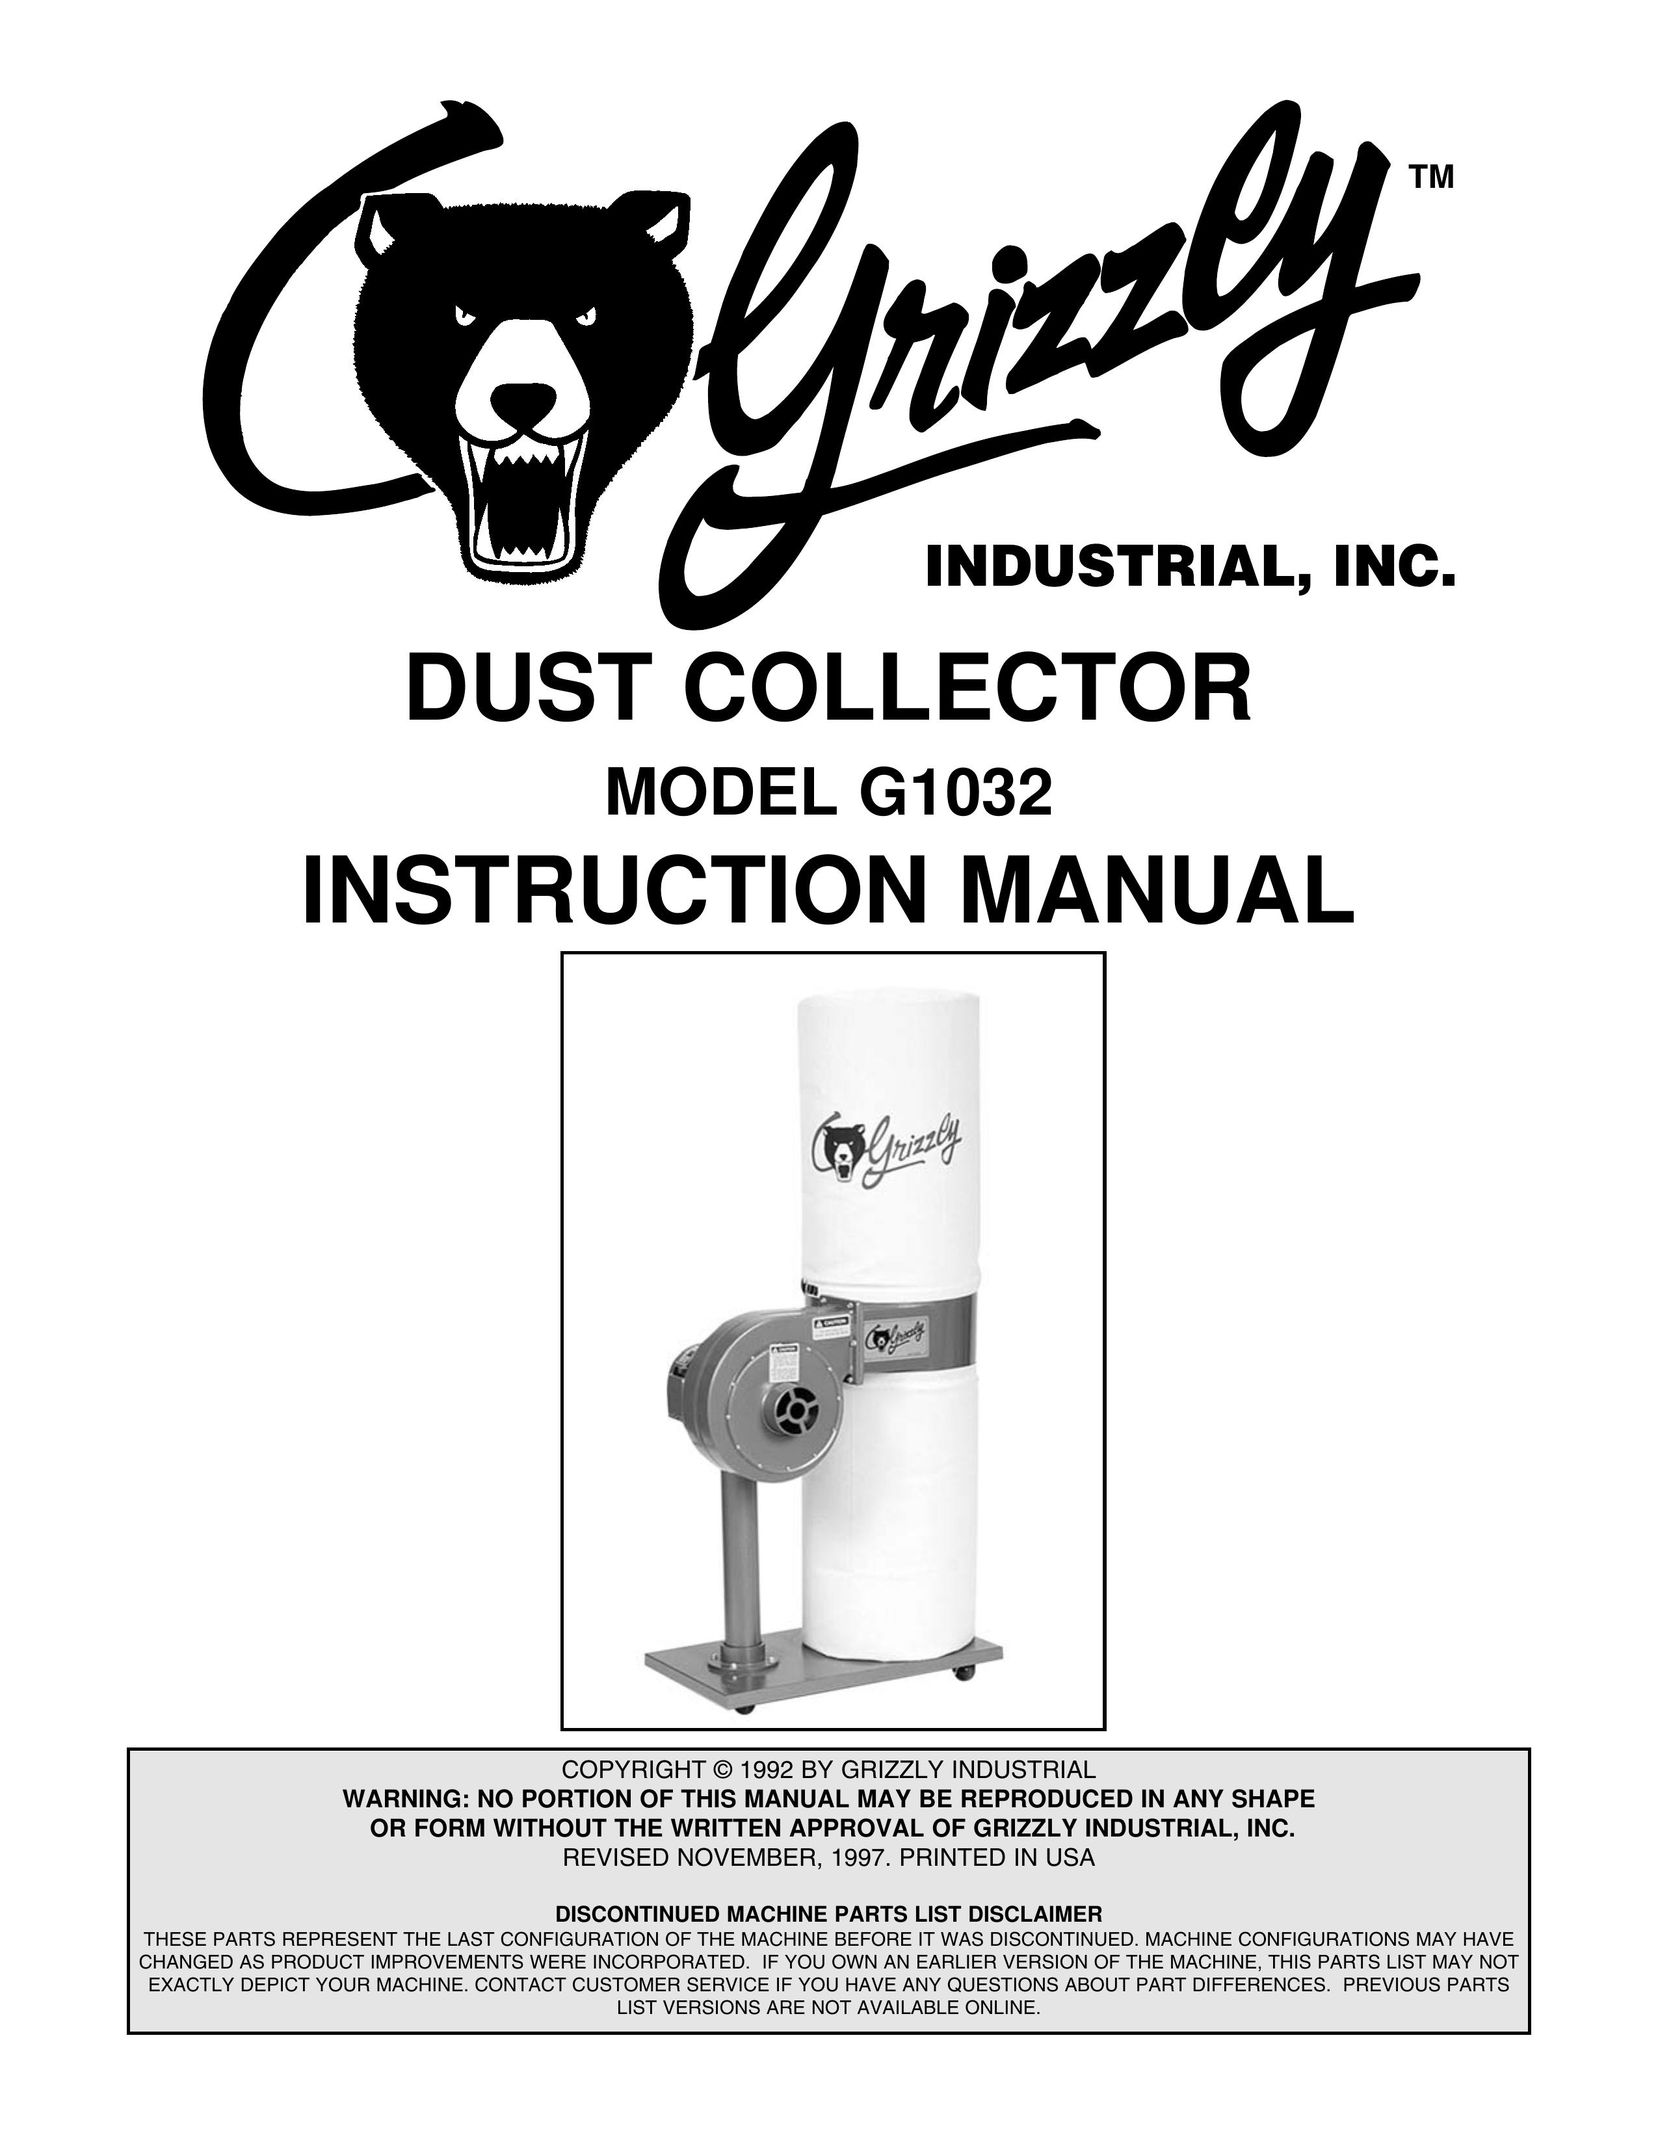 Grizzly G1032 Dust Collector User Manual